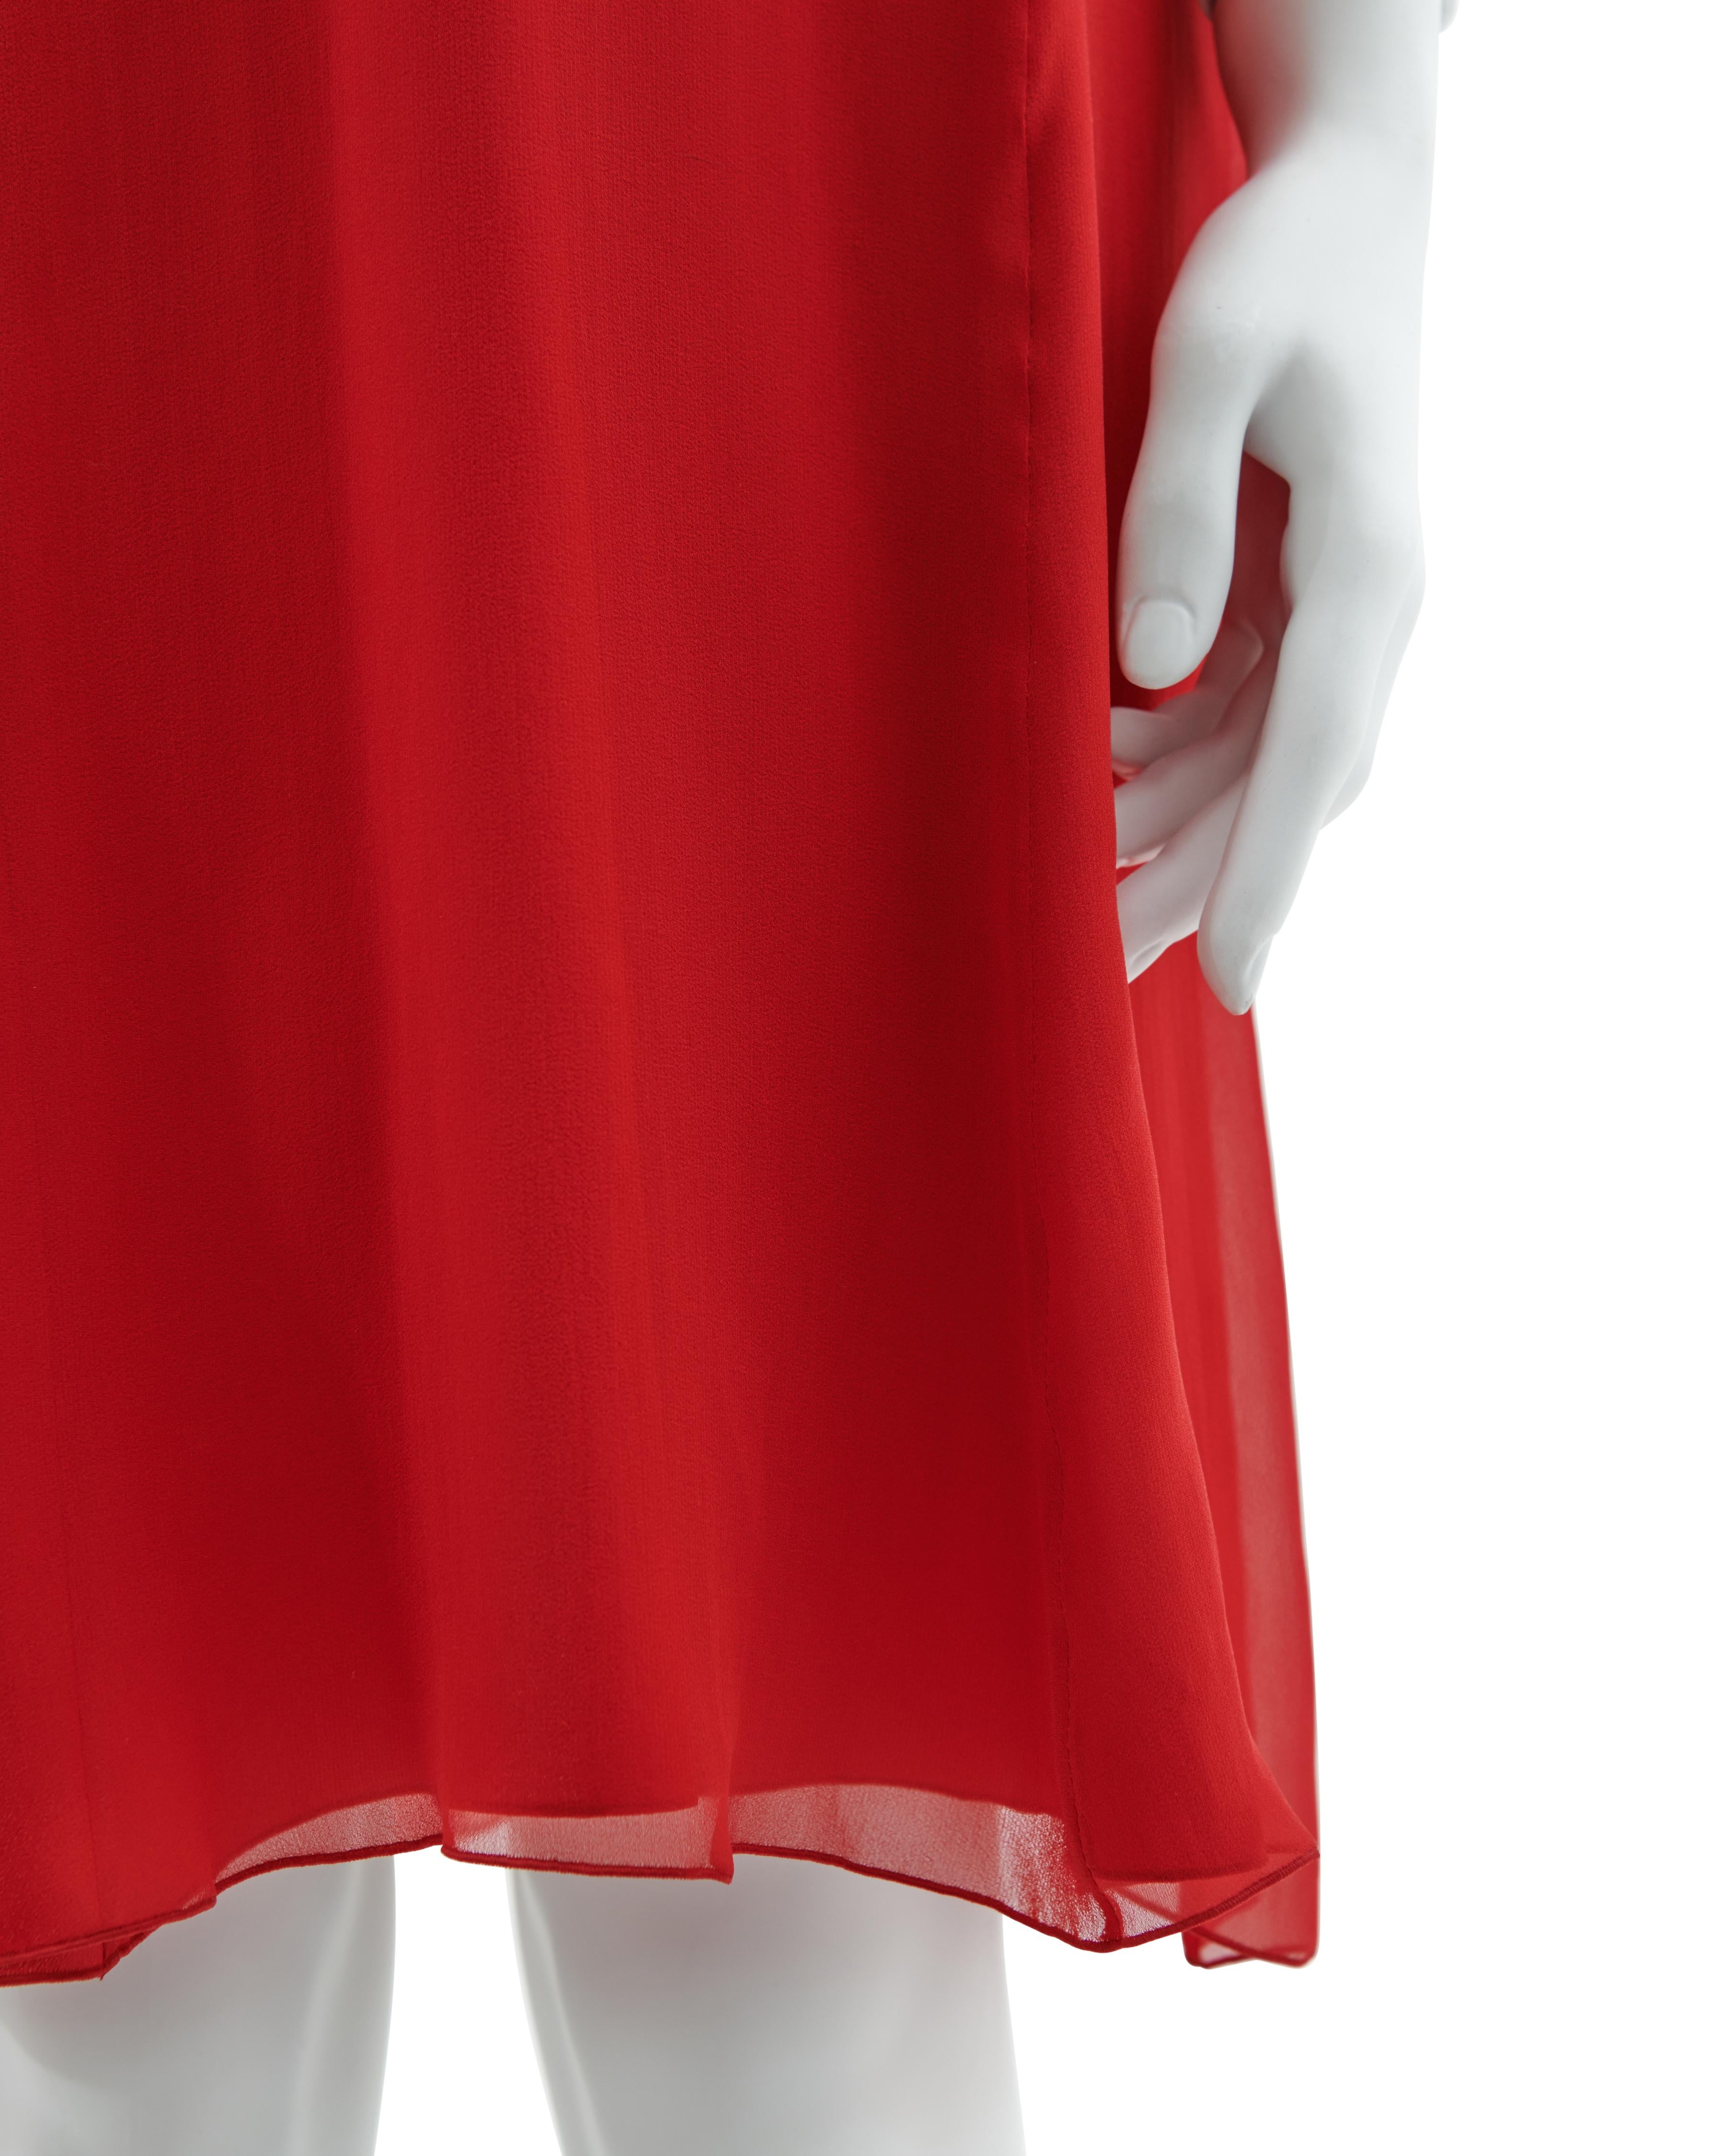 Valentino S/S 2007 Red halter neck chiffon cocktail dress For Sale 5